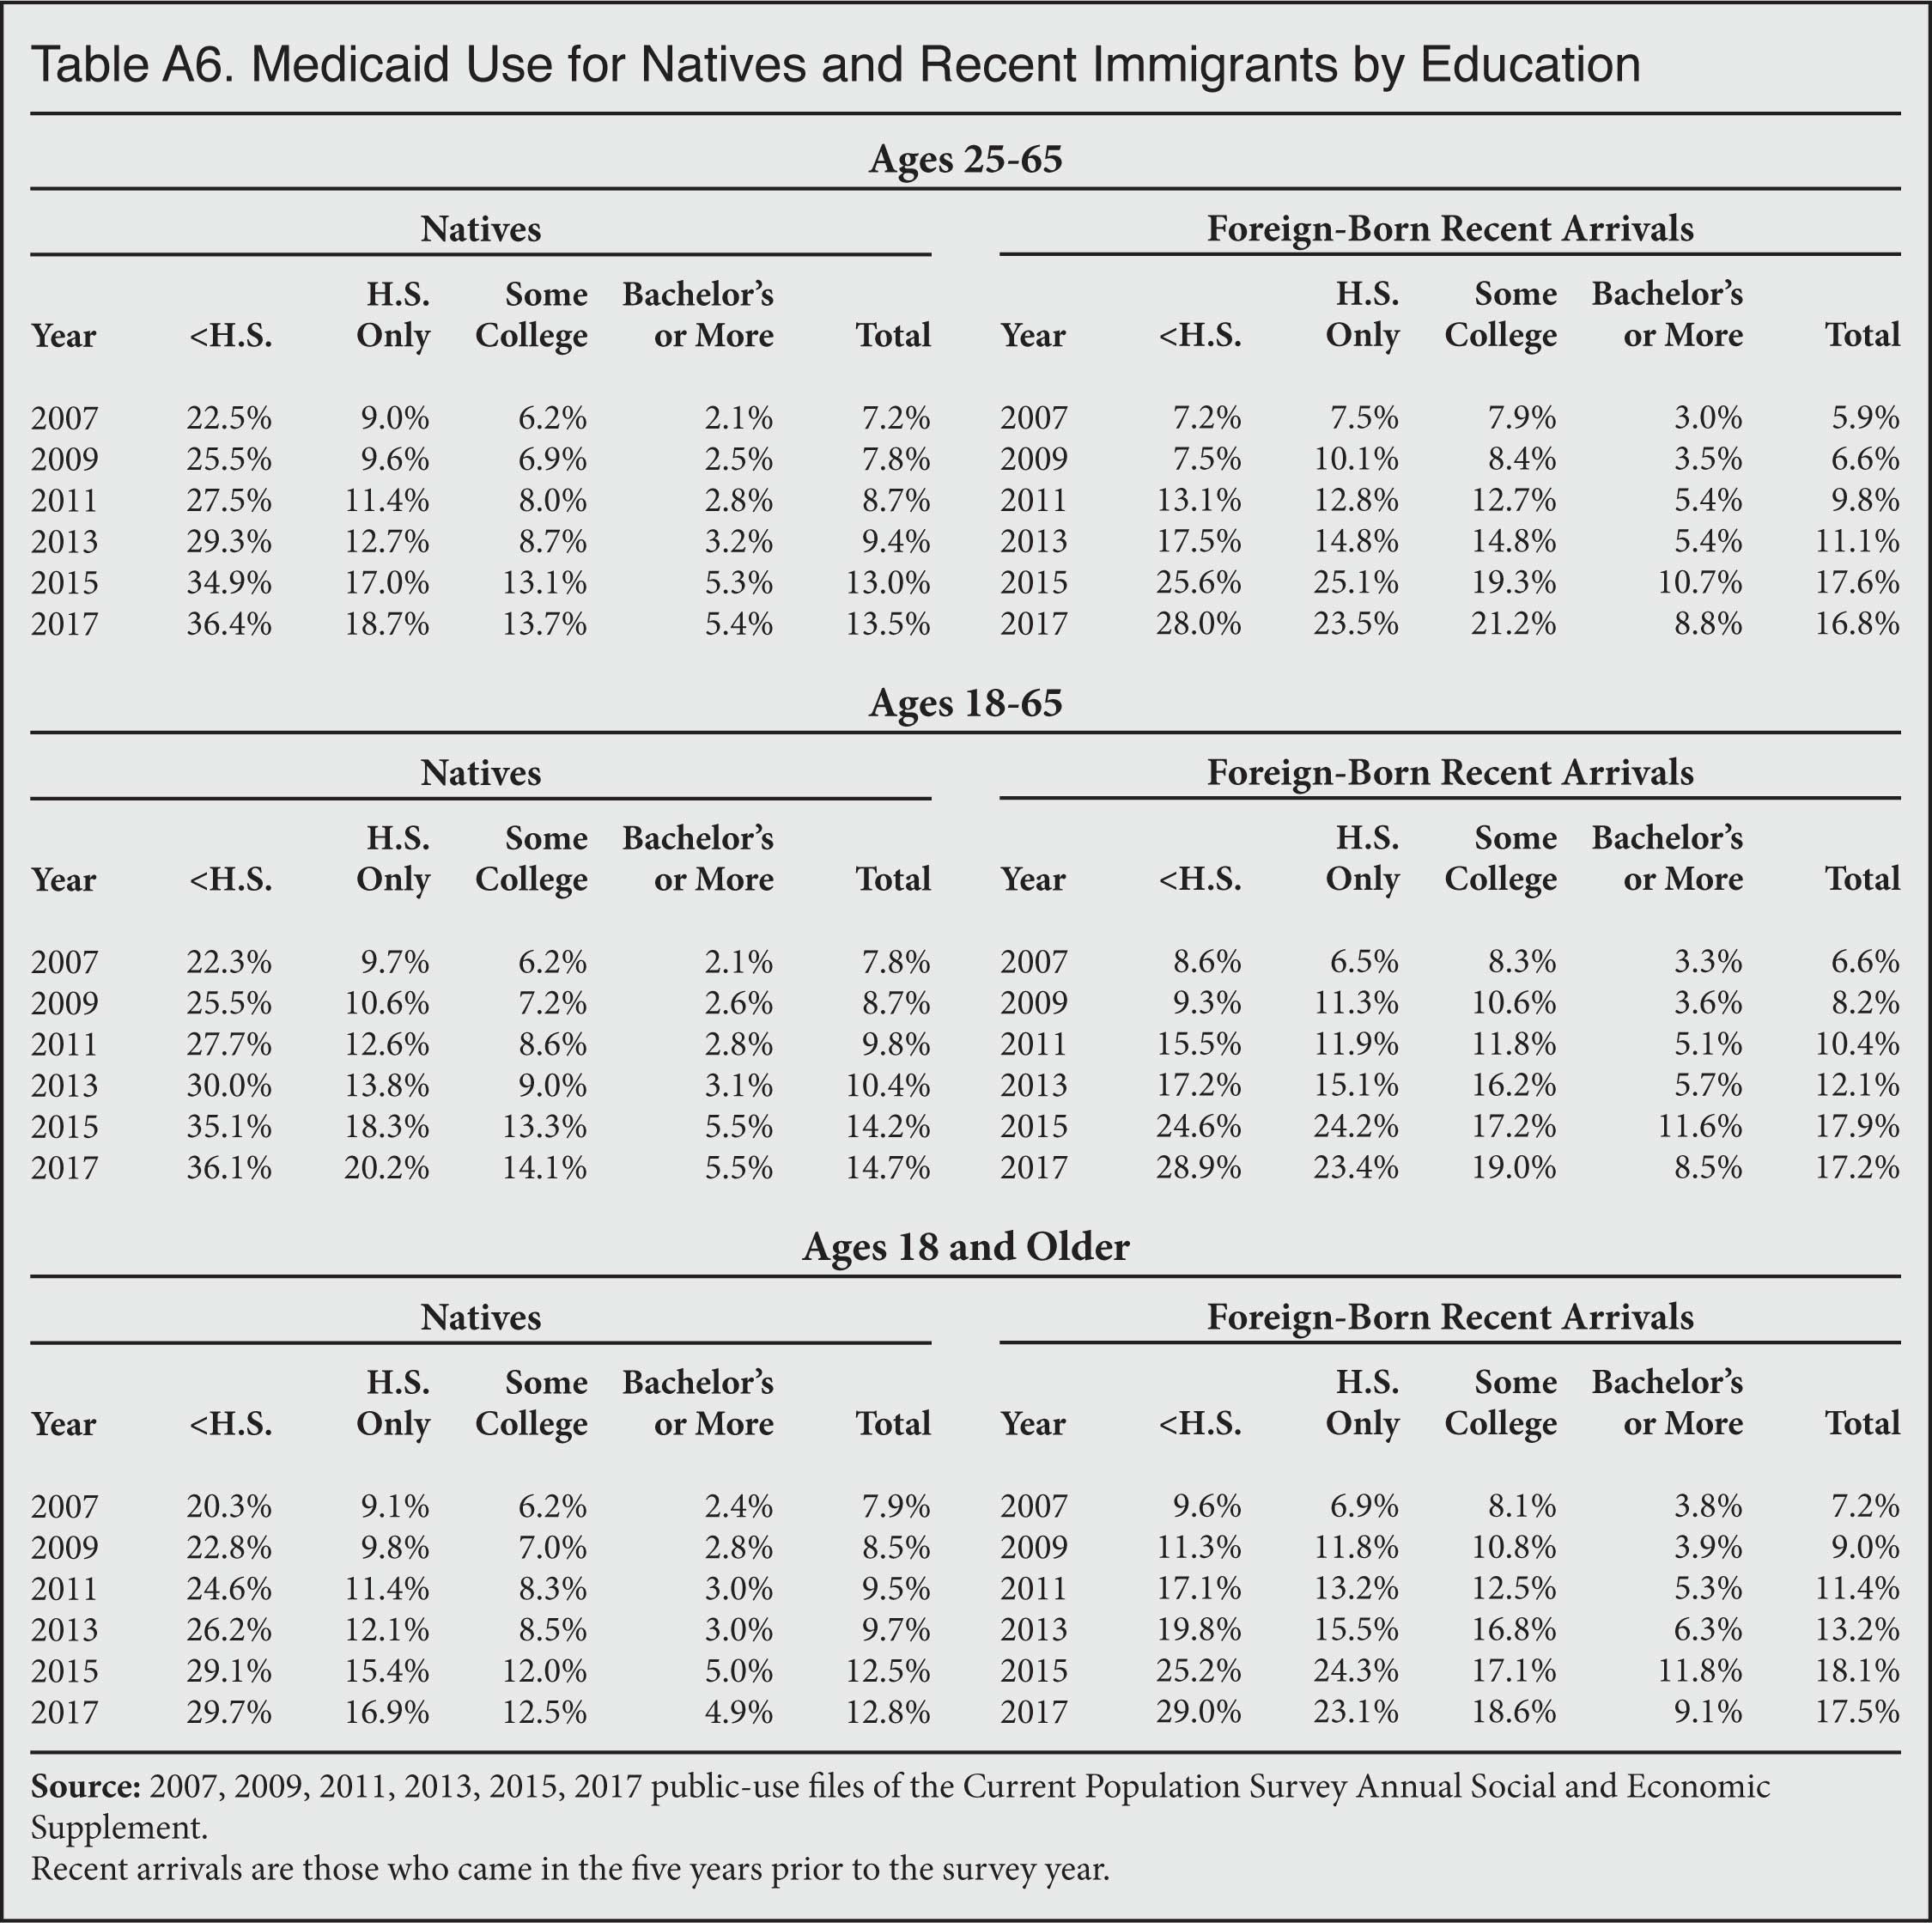 Table: Medicaid Use for Natives and Recent Immigrants by Education, 2007-2017